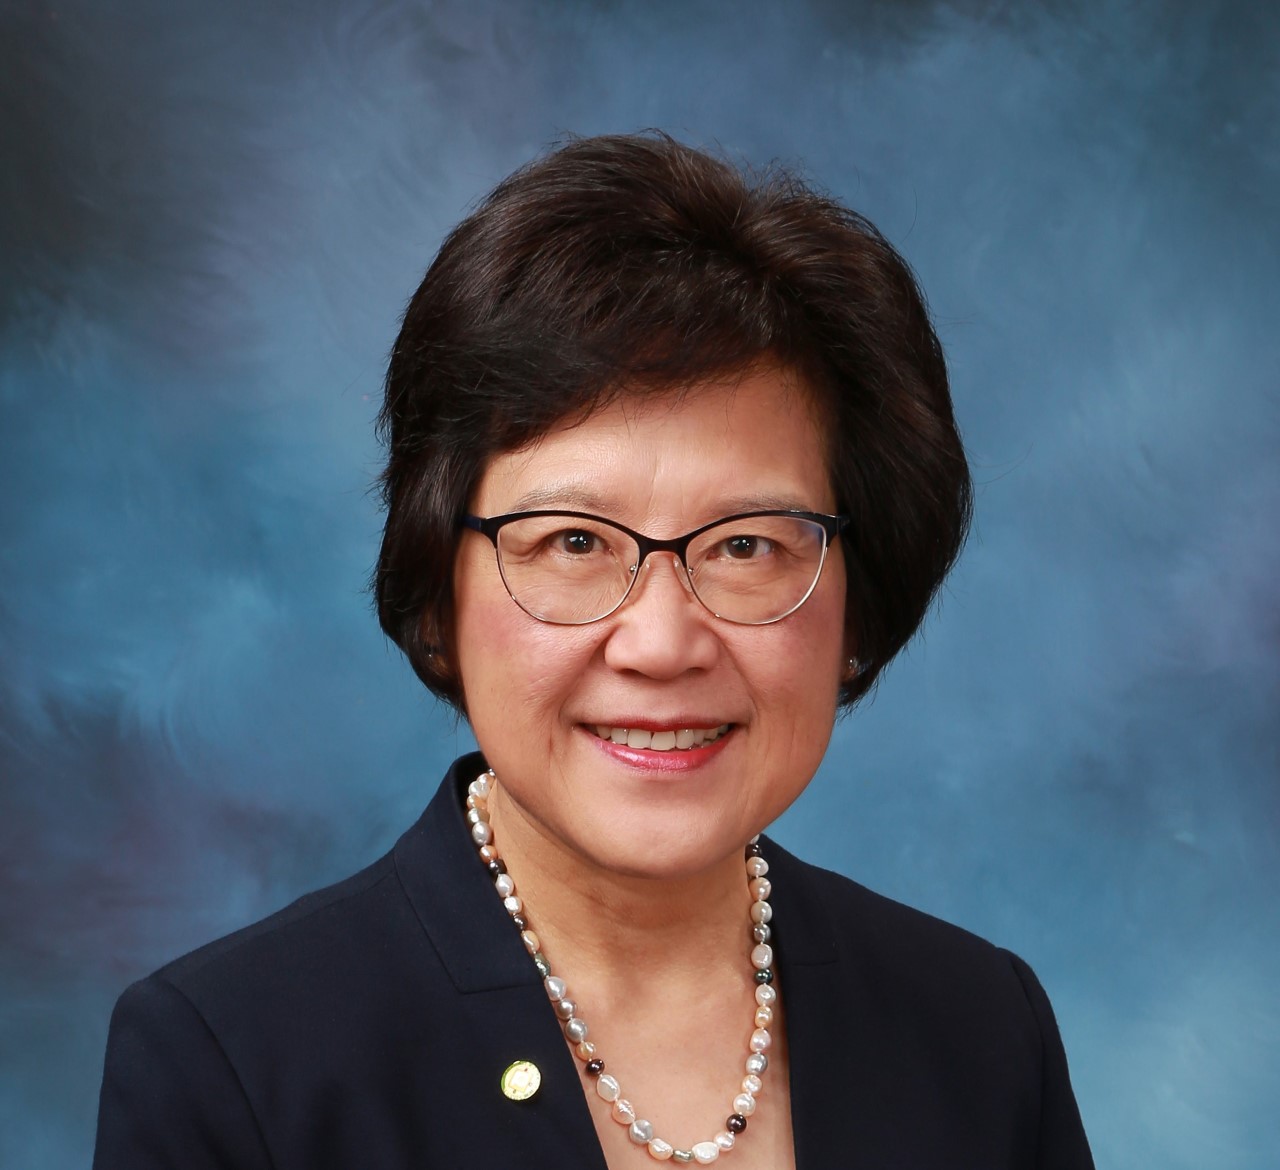 Pamela Lau, an Asian woman with dark hair who is wearing glasses and a pearl necklace.